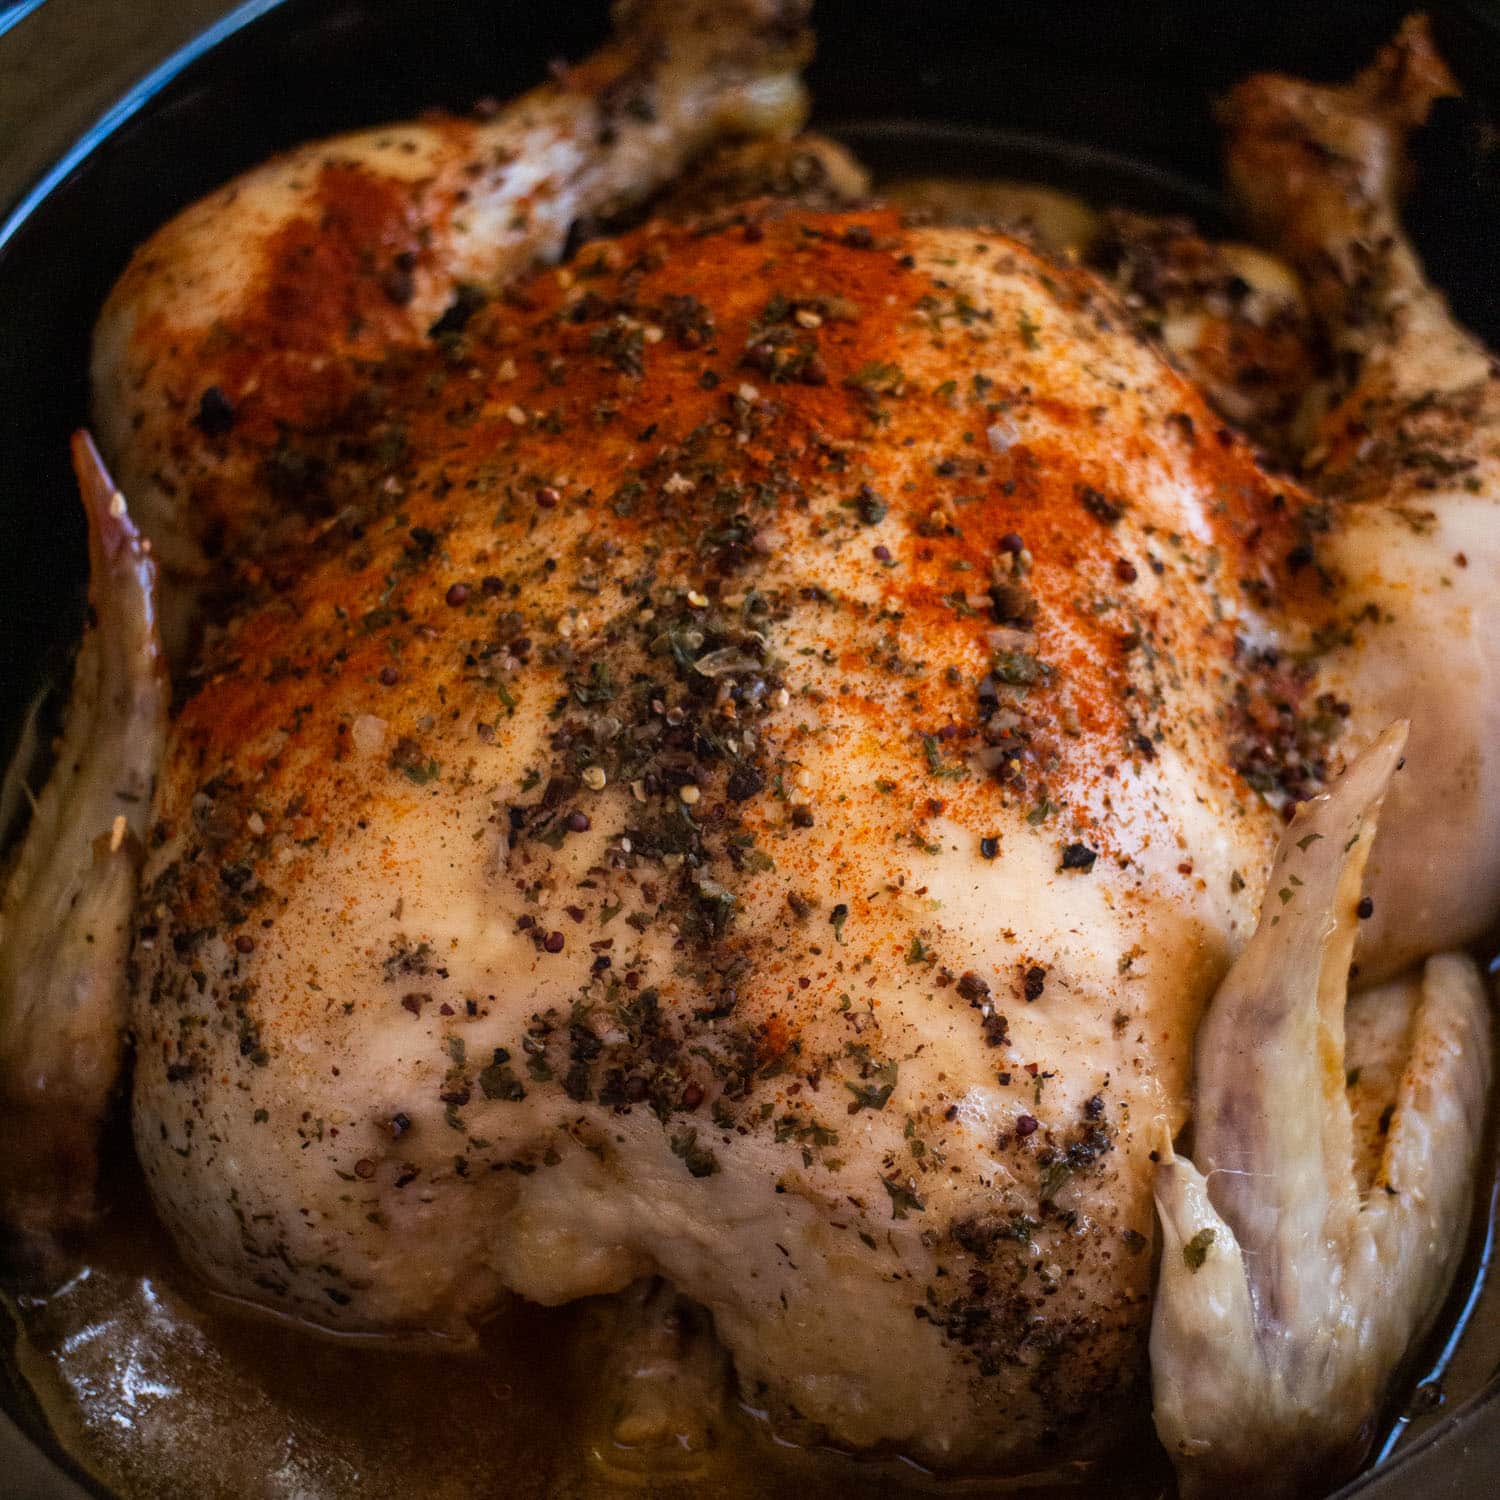 https://brooklynfarmgirl.com/wp-content/uploads/2019/05/4-HOUR-Juicy-Slow-Cooker-Whole-Chicken-Featured-Image.jpg